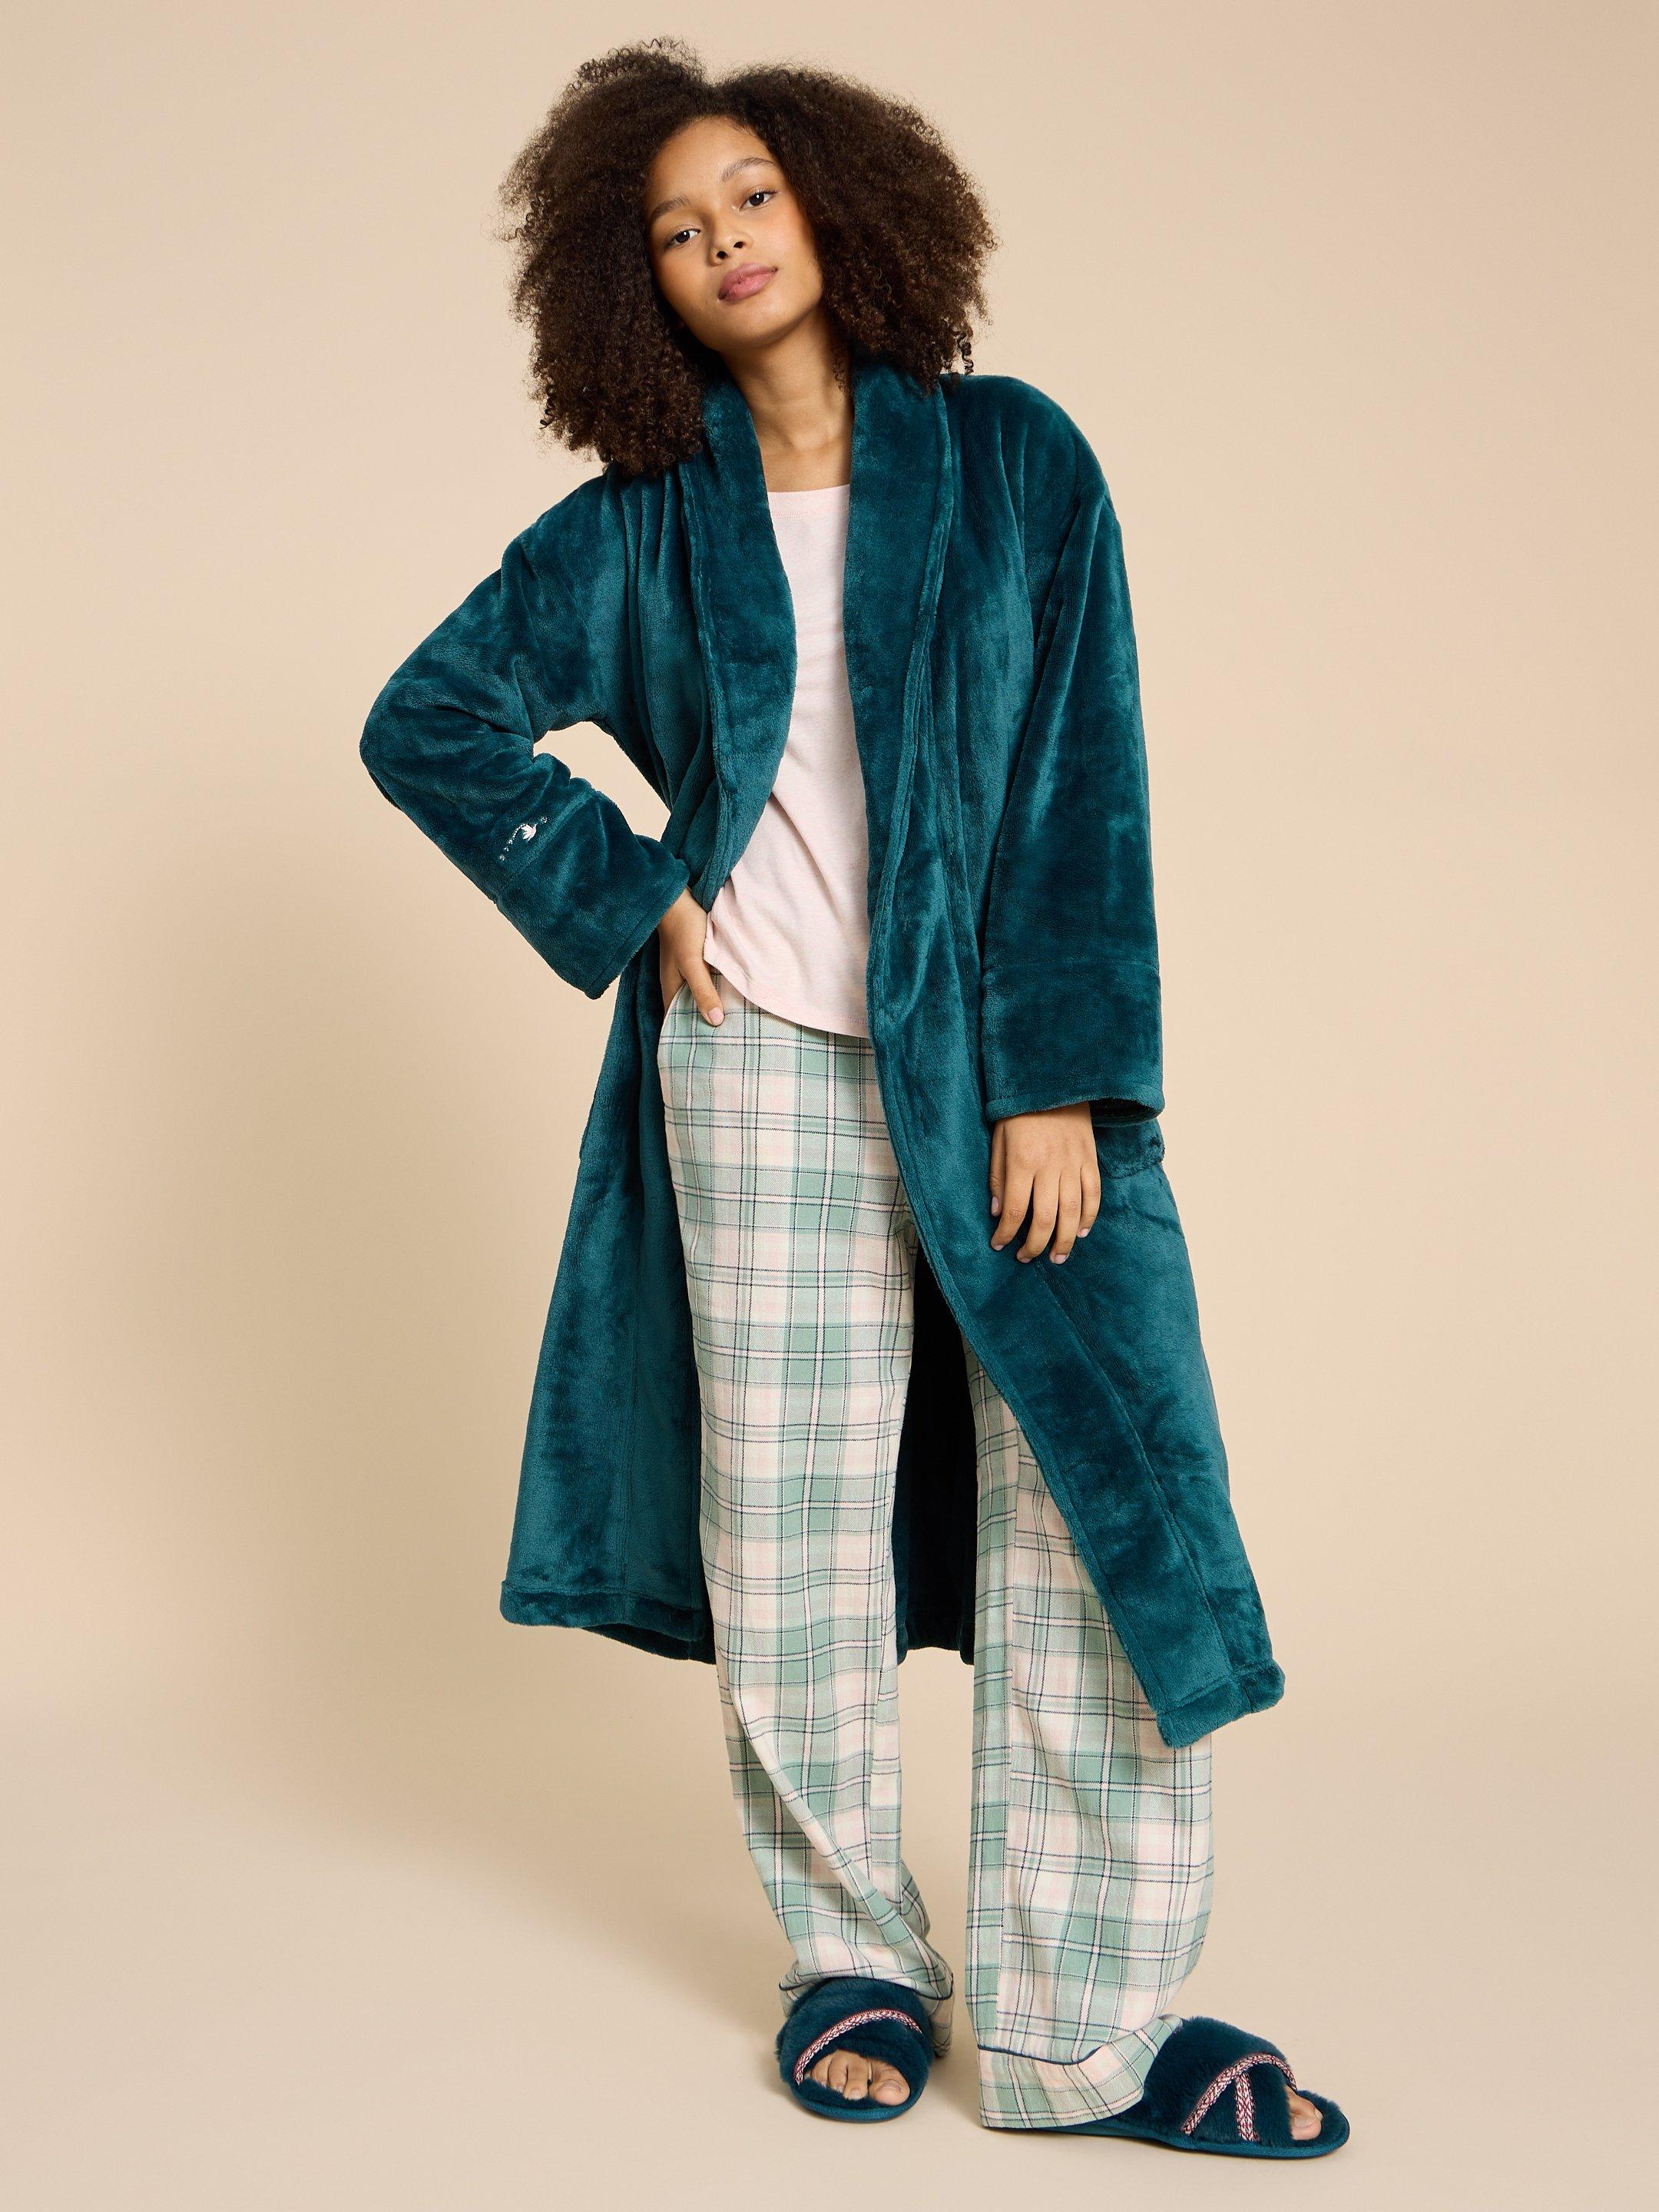 Clover Cosy Dressing Gown in DK TEAL - MODEL FRONT